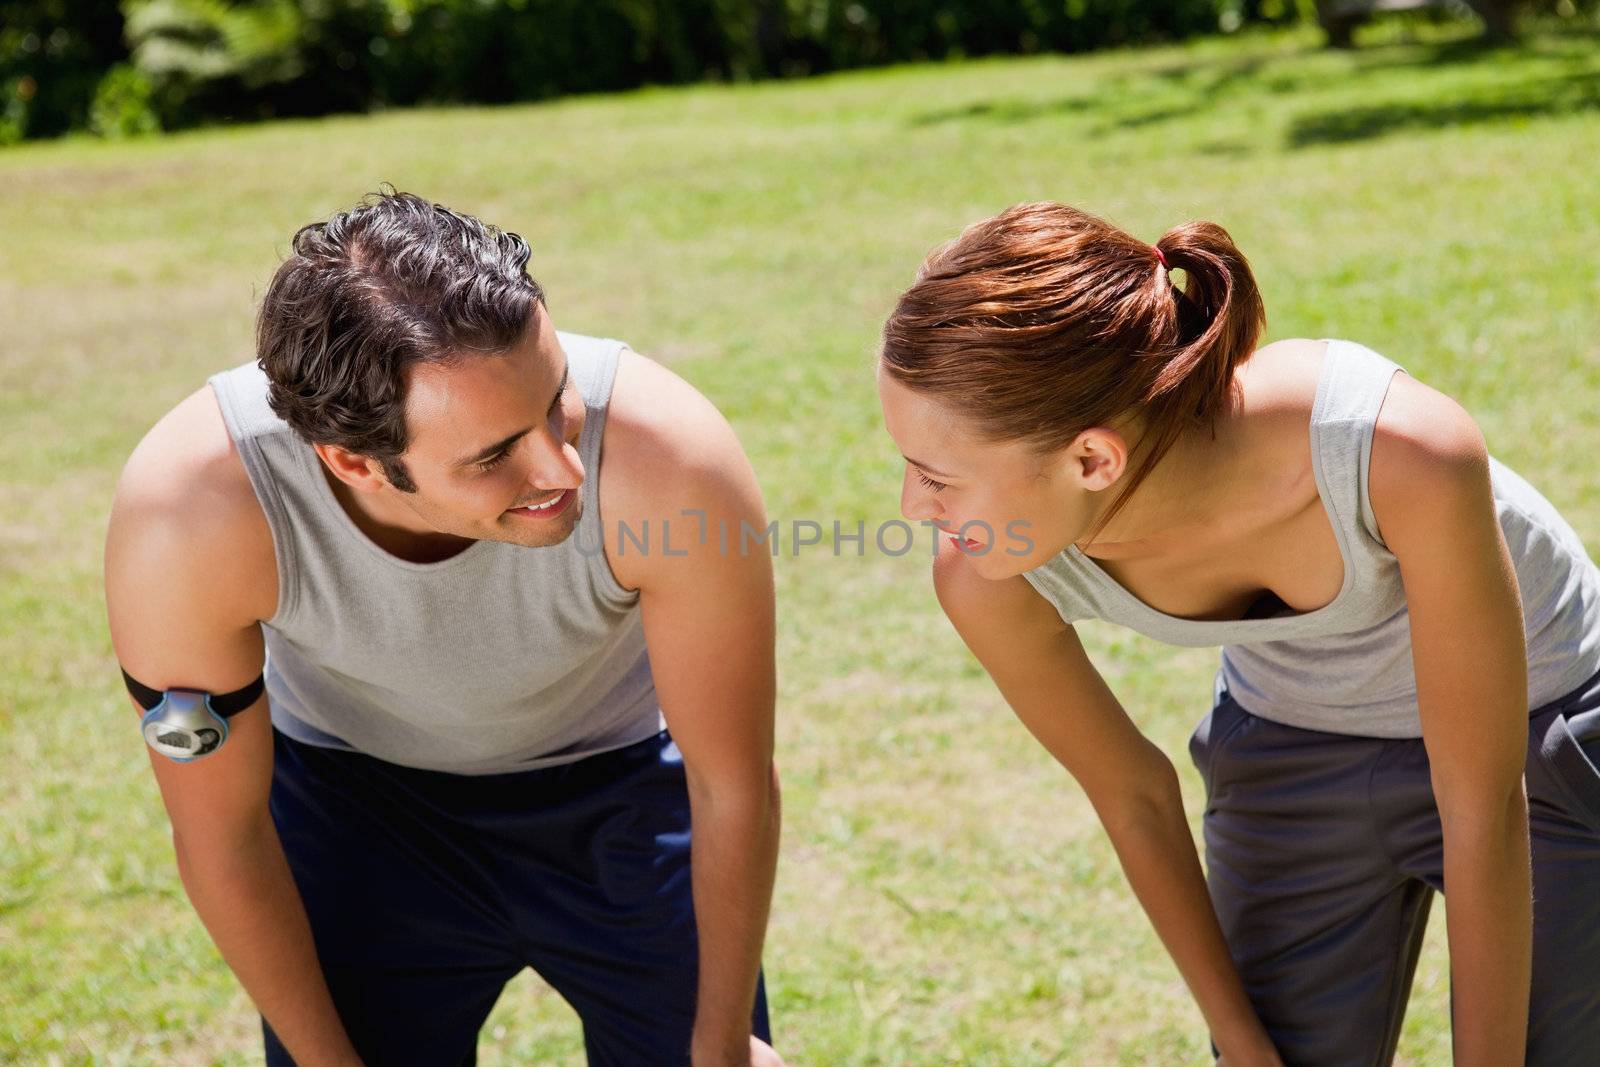 Man and a woman bending over as they recover while looking at each other